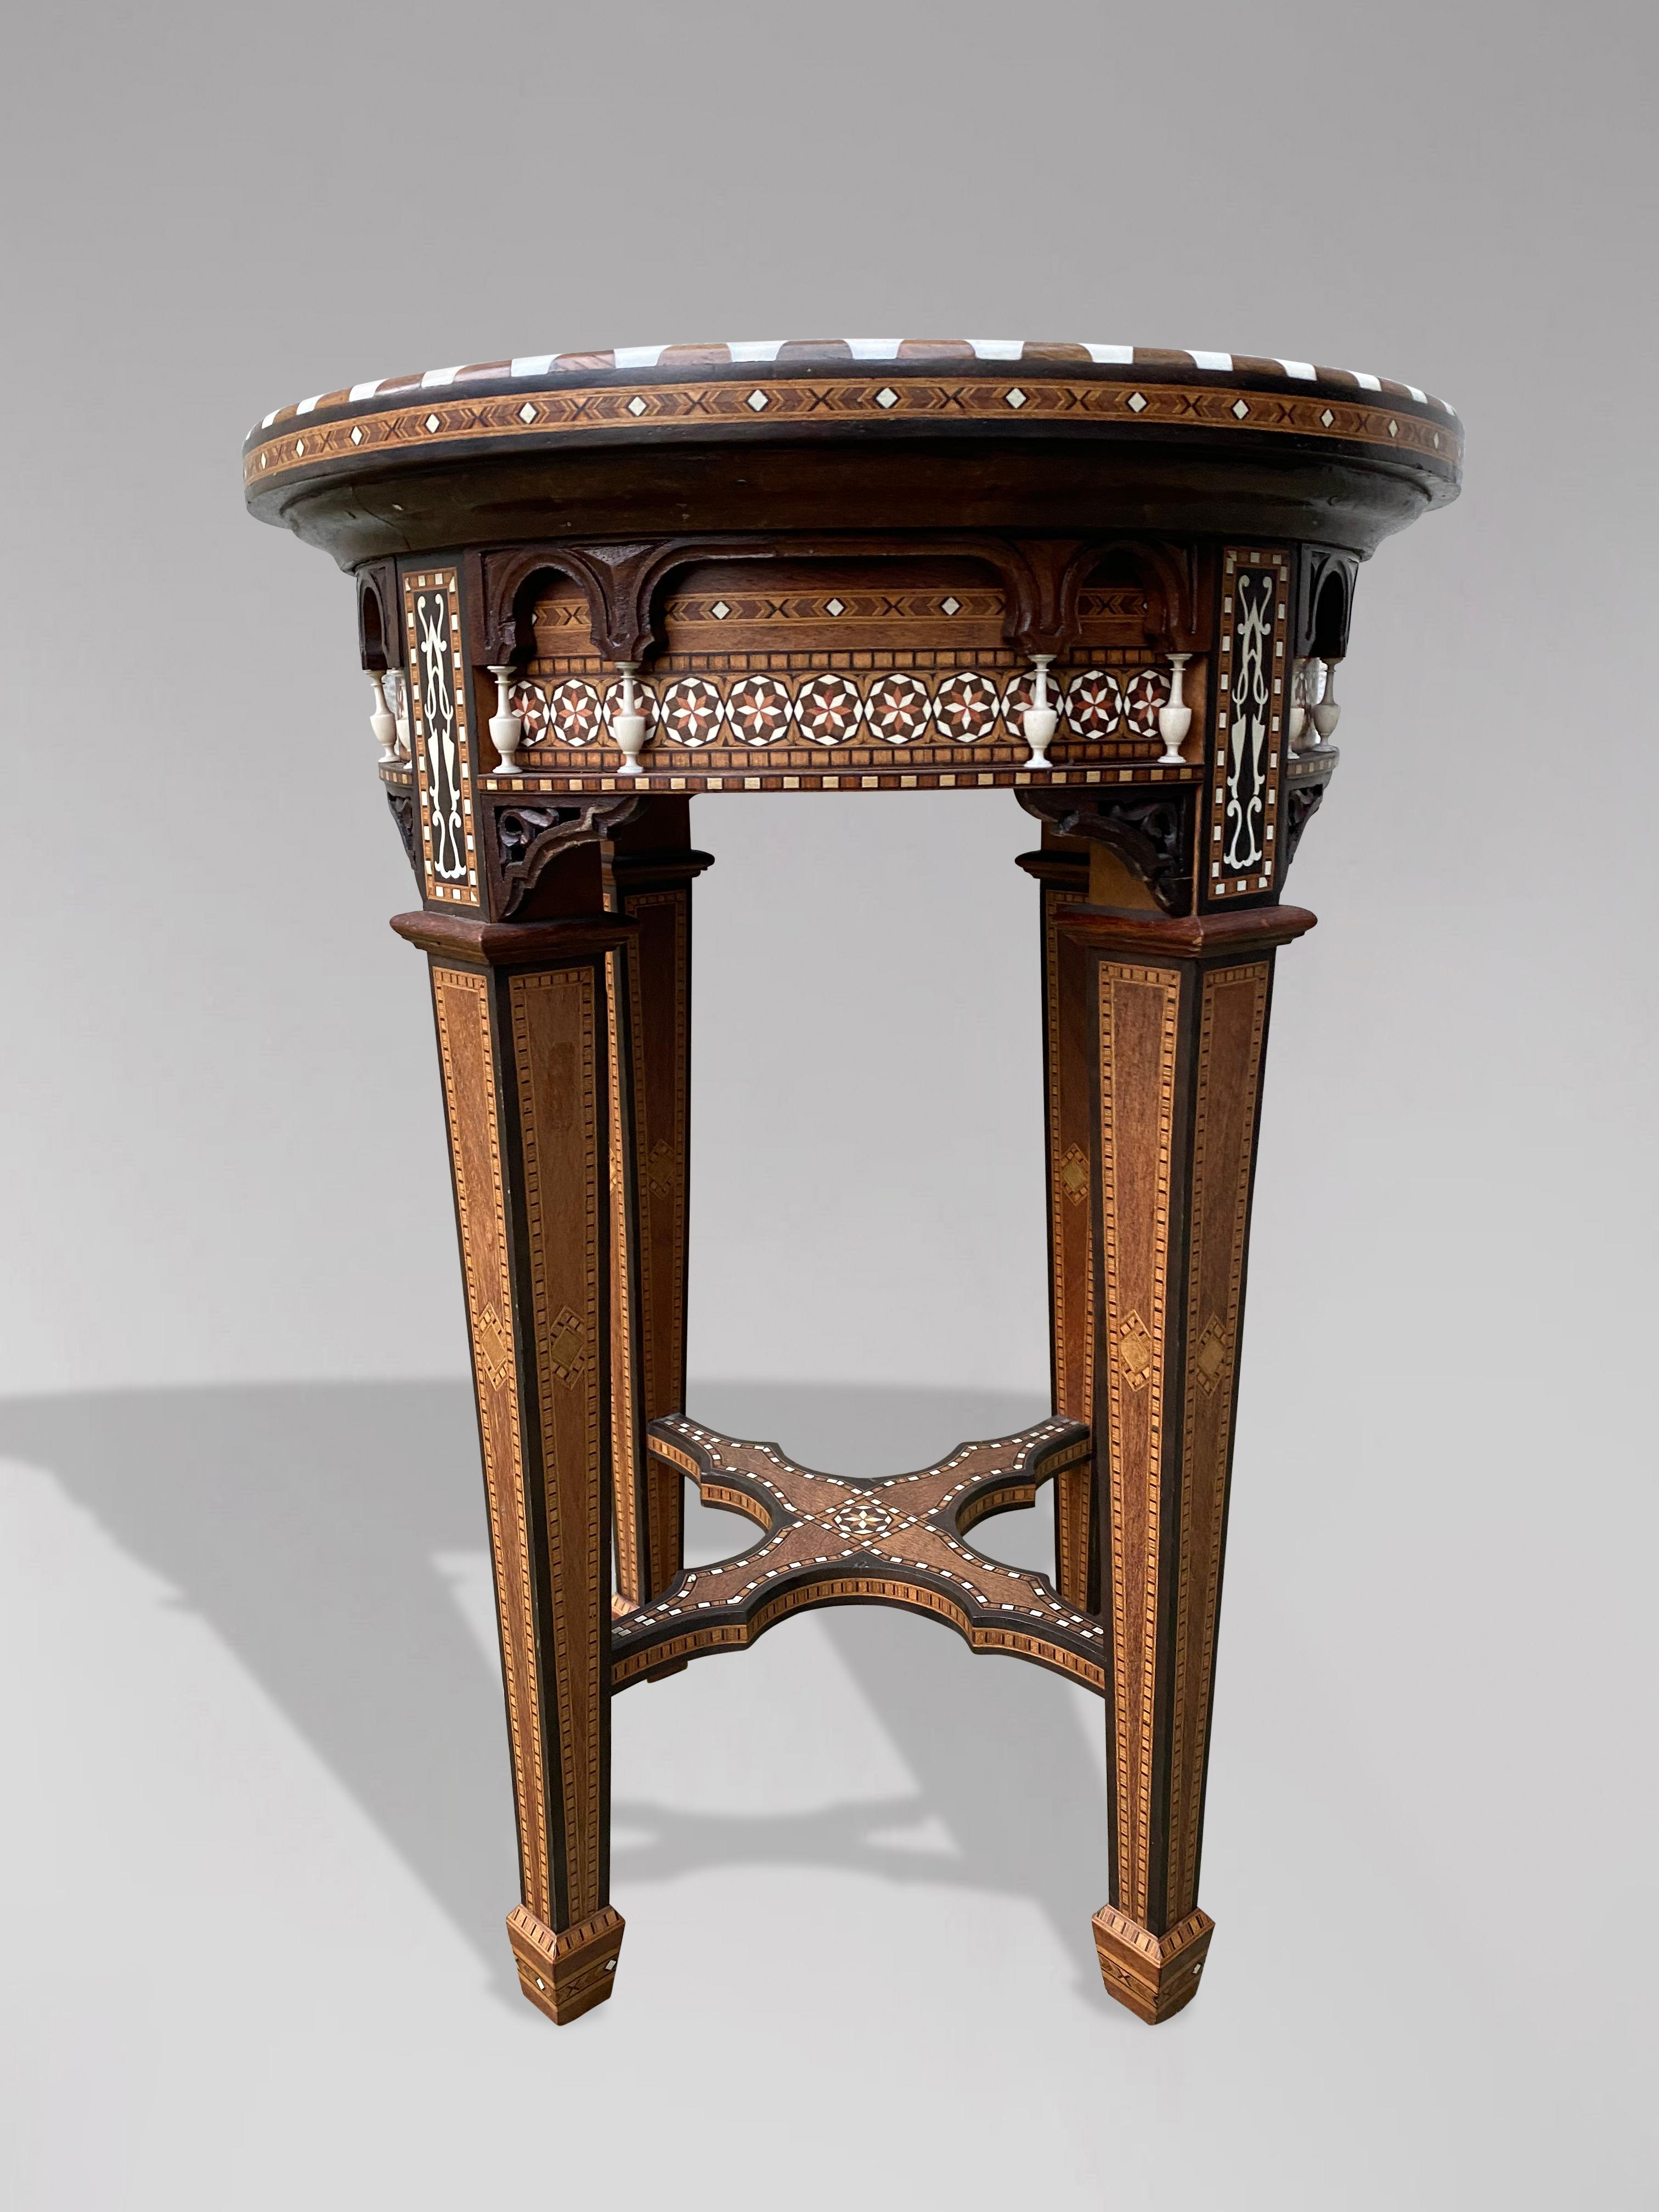 Syrian 19th Century Mosaic Inlaid Occasional Table